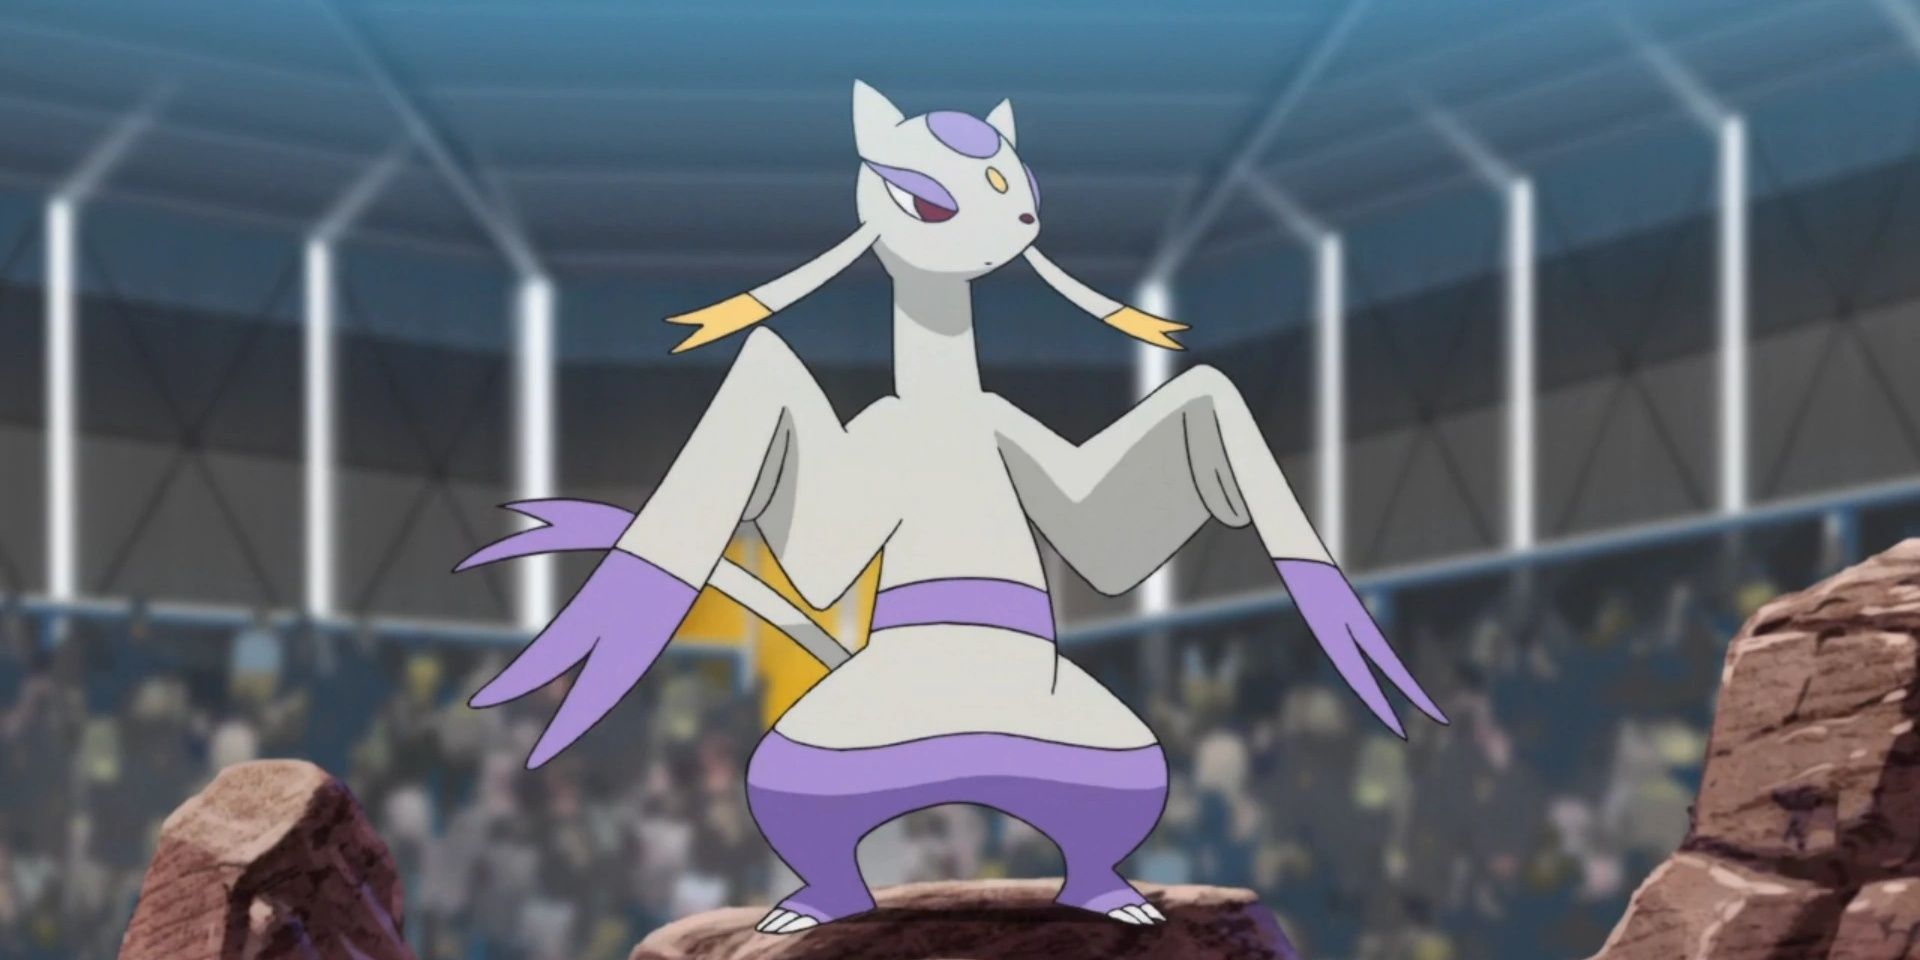 Mienshao, a Pokemon, standing on a rock in an arena.